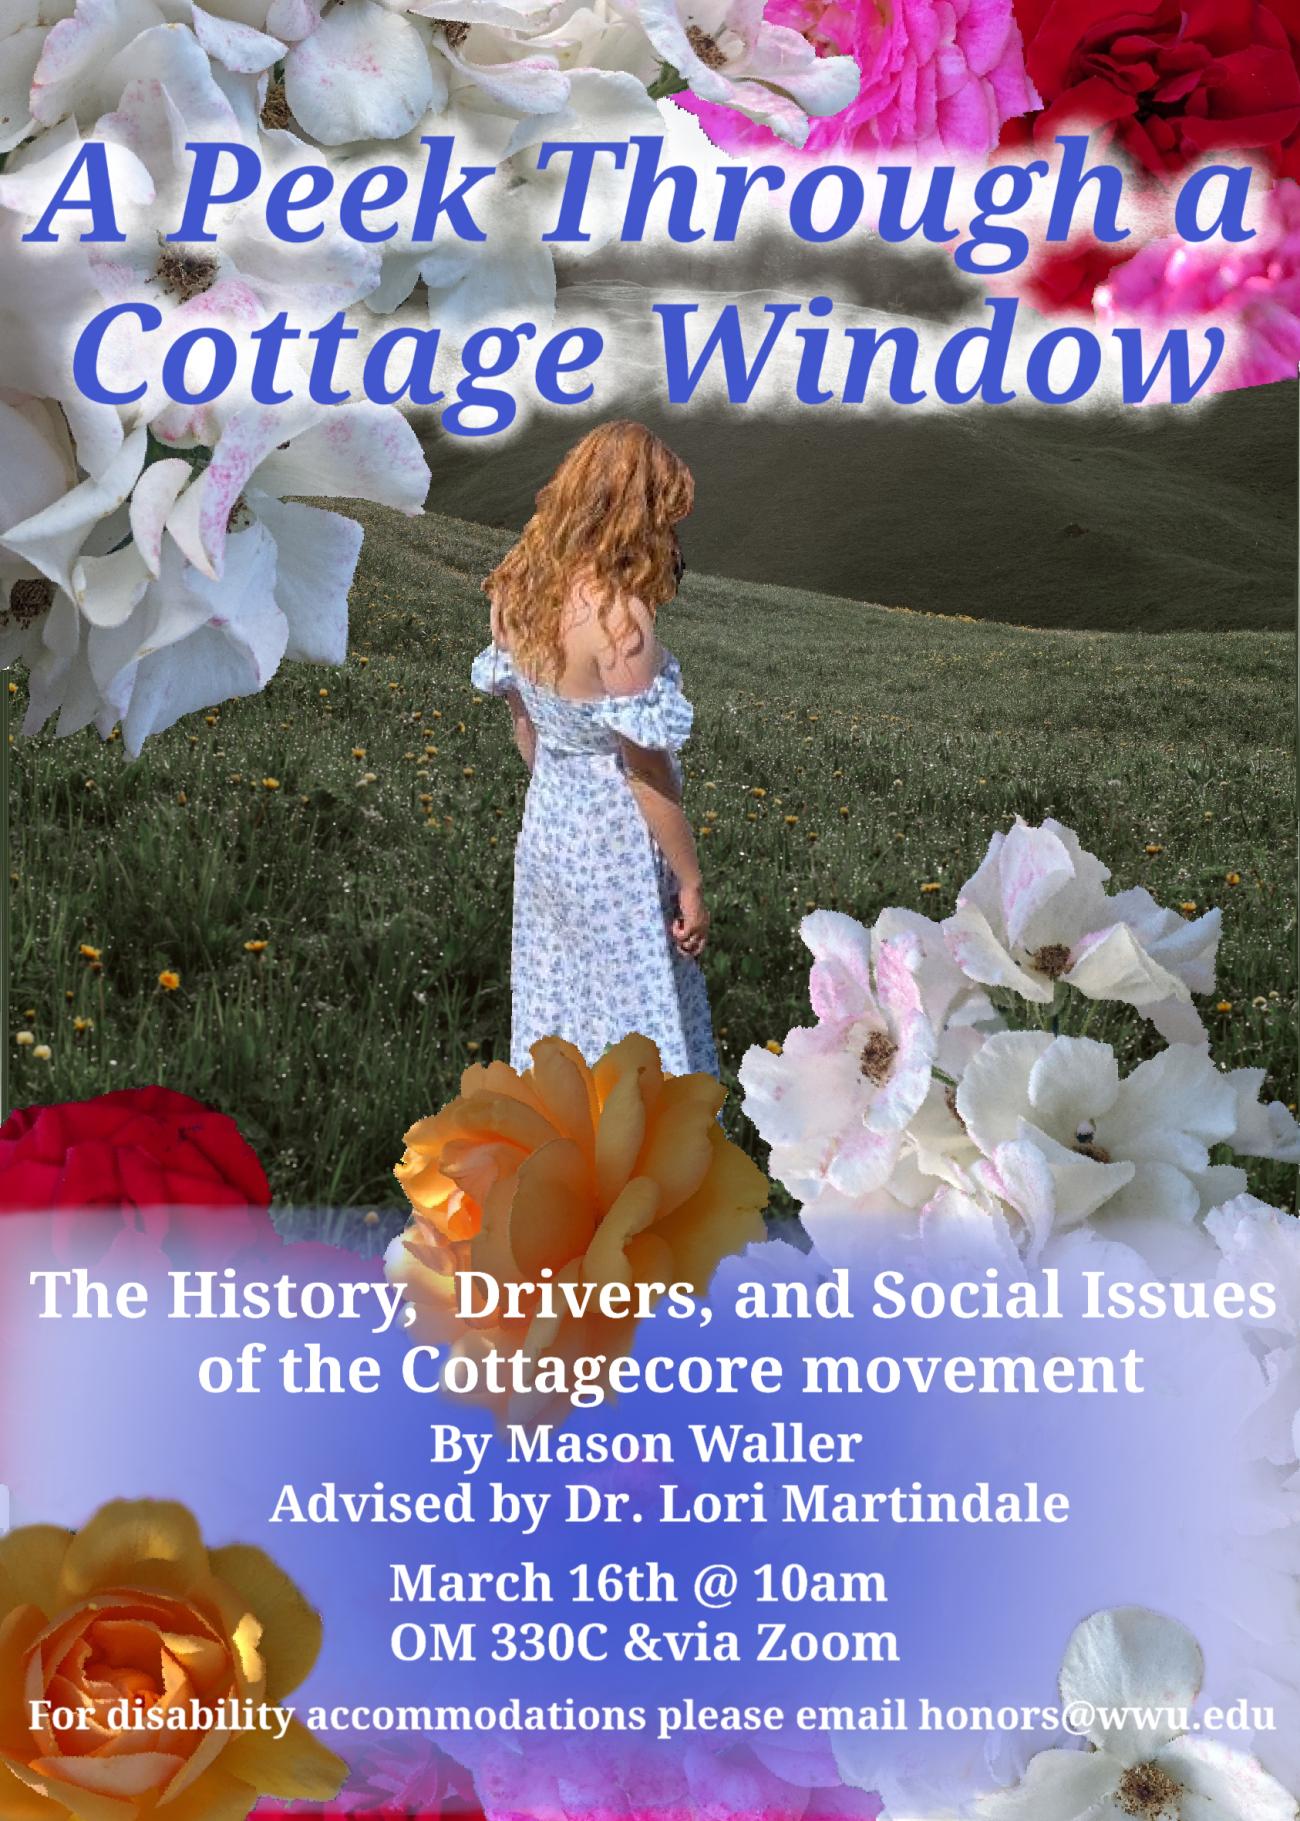 Girl standing in a grass field with a border of roses. The text reads: "A Peek Through a Cottage Window. This History, Drivers, and Social Issues of the Cottagecore movement. By Mason Waller, Advised by Dr. Lori Martindale. March 16th @ 10 am OM 330C and via Zoom"